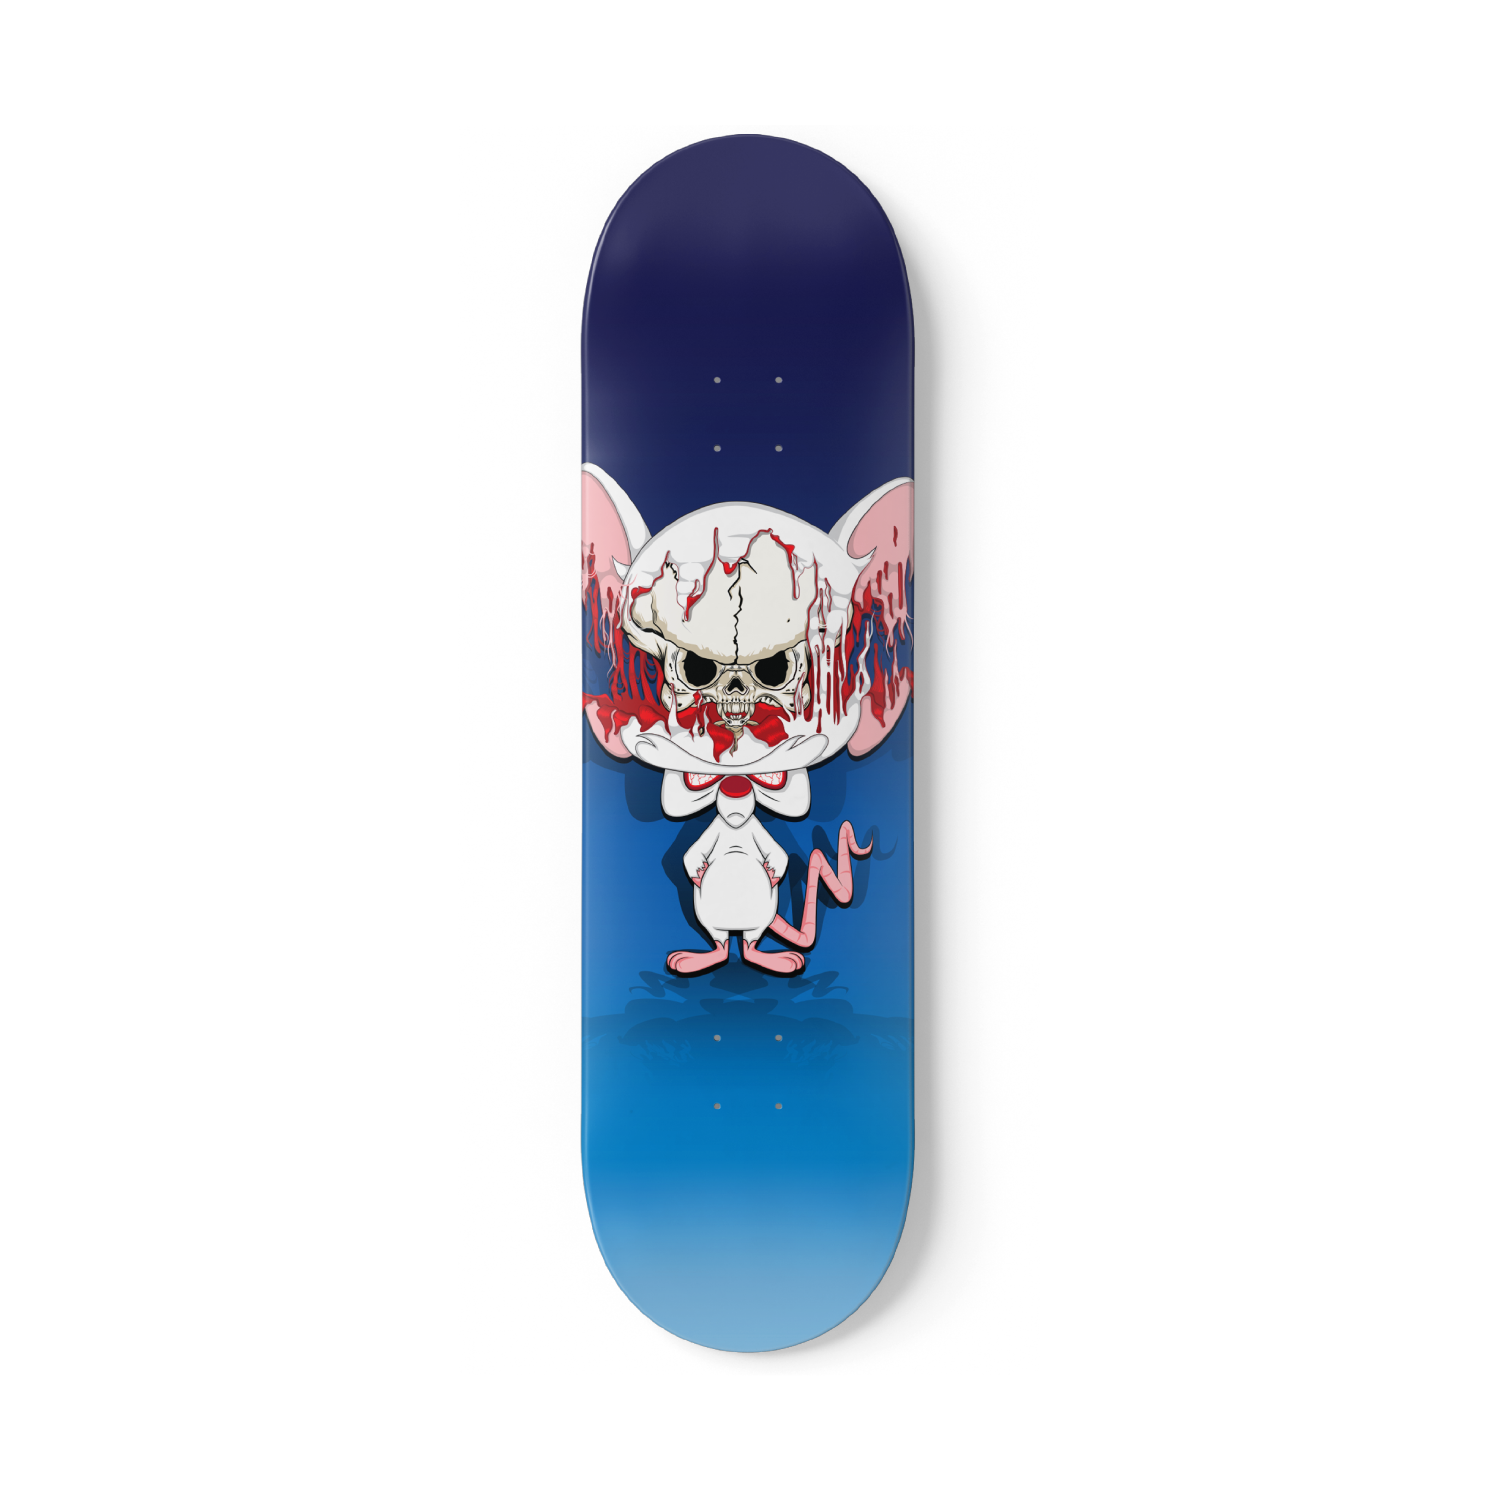 temperament compenseren Toestemming Nope Skateboards - The Brain Skateboard Deck - By MrNope — Nope - No  Ordinary People Exist